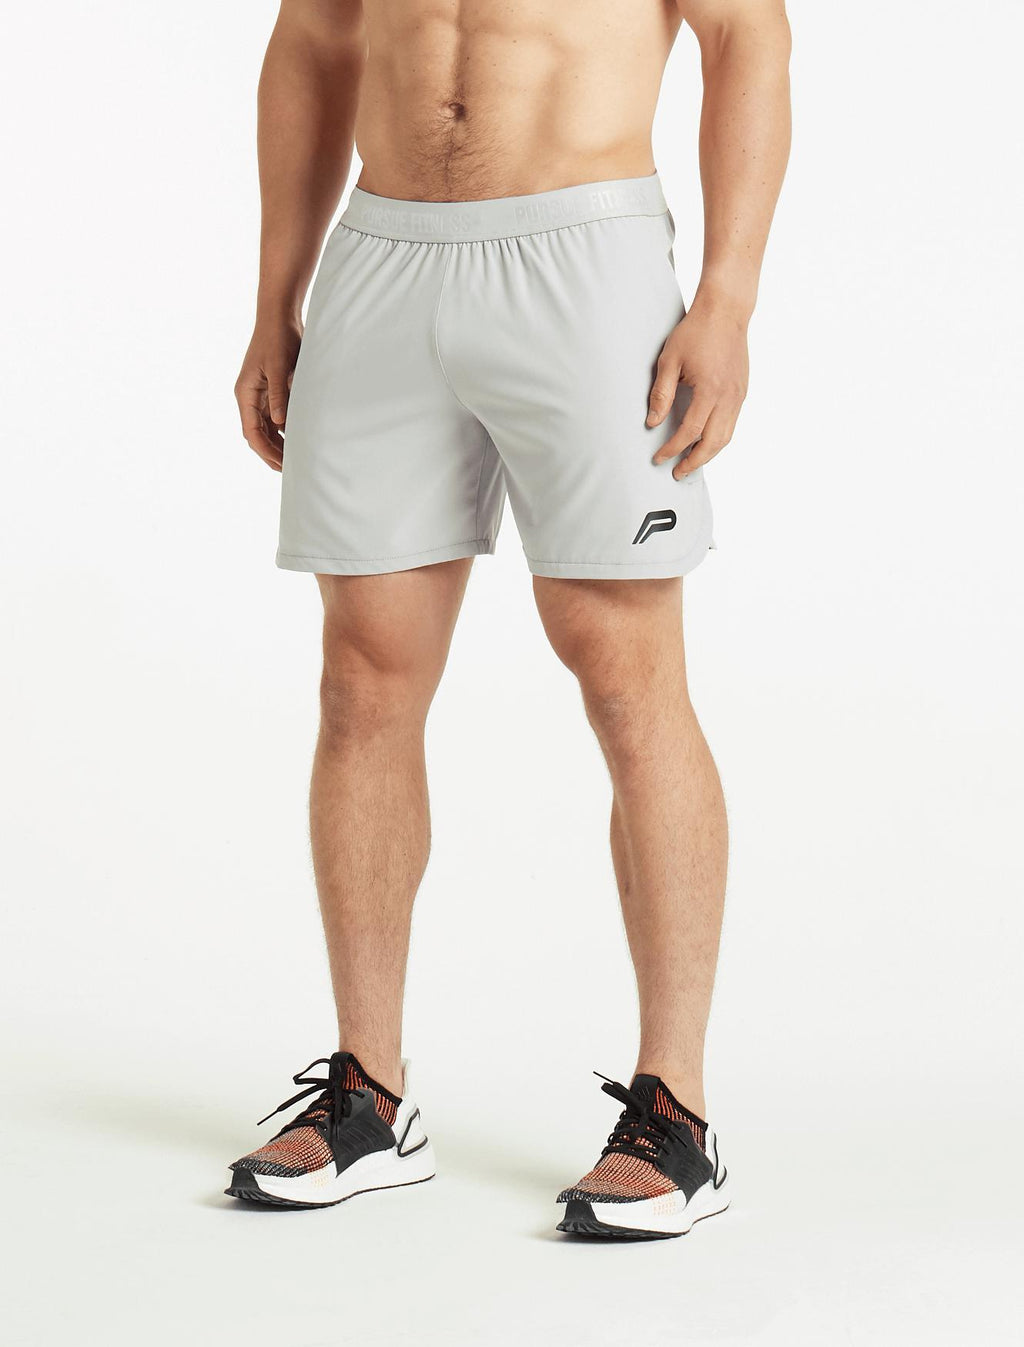 products/mens-performance-mid-rise-shorts-grey.jpg